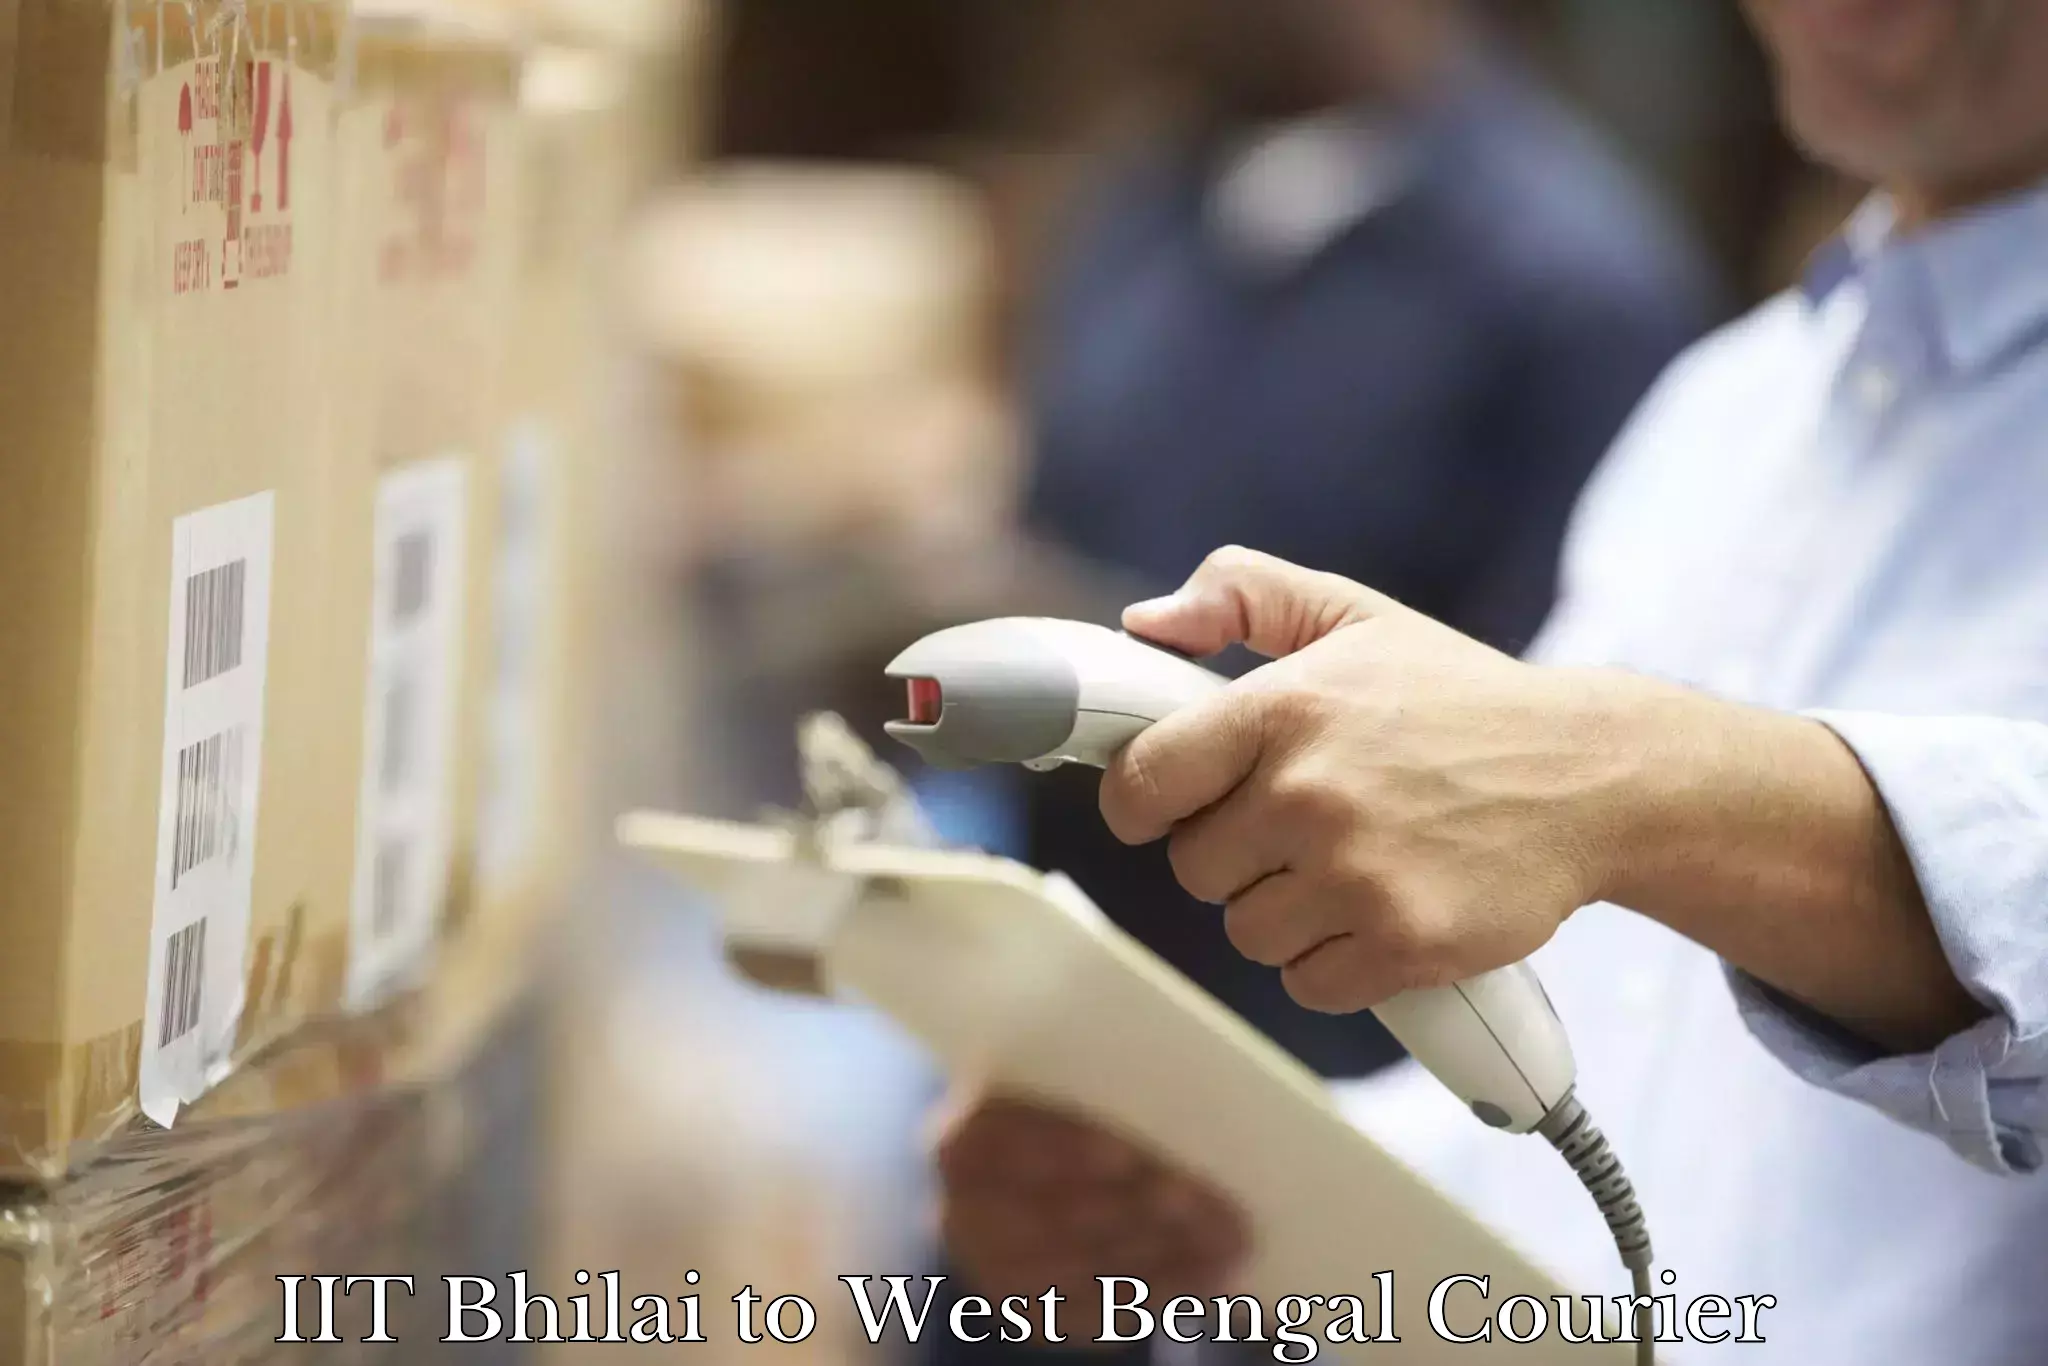 Courier service booking IIT Bhilai to West Bengal